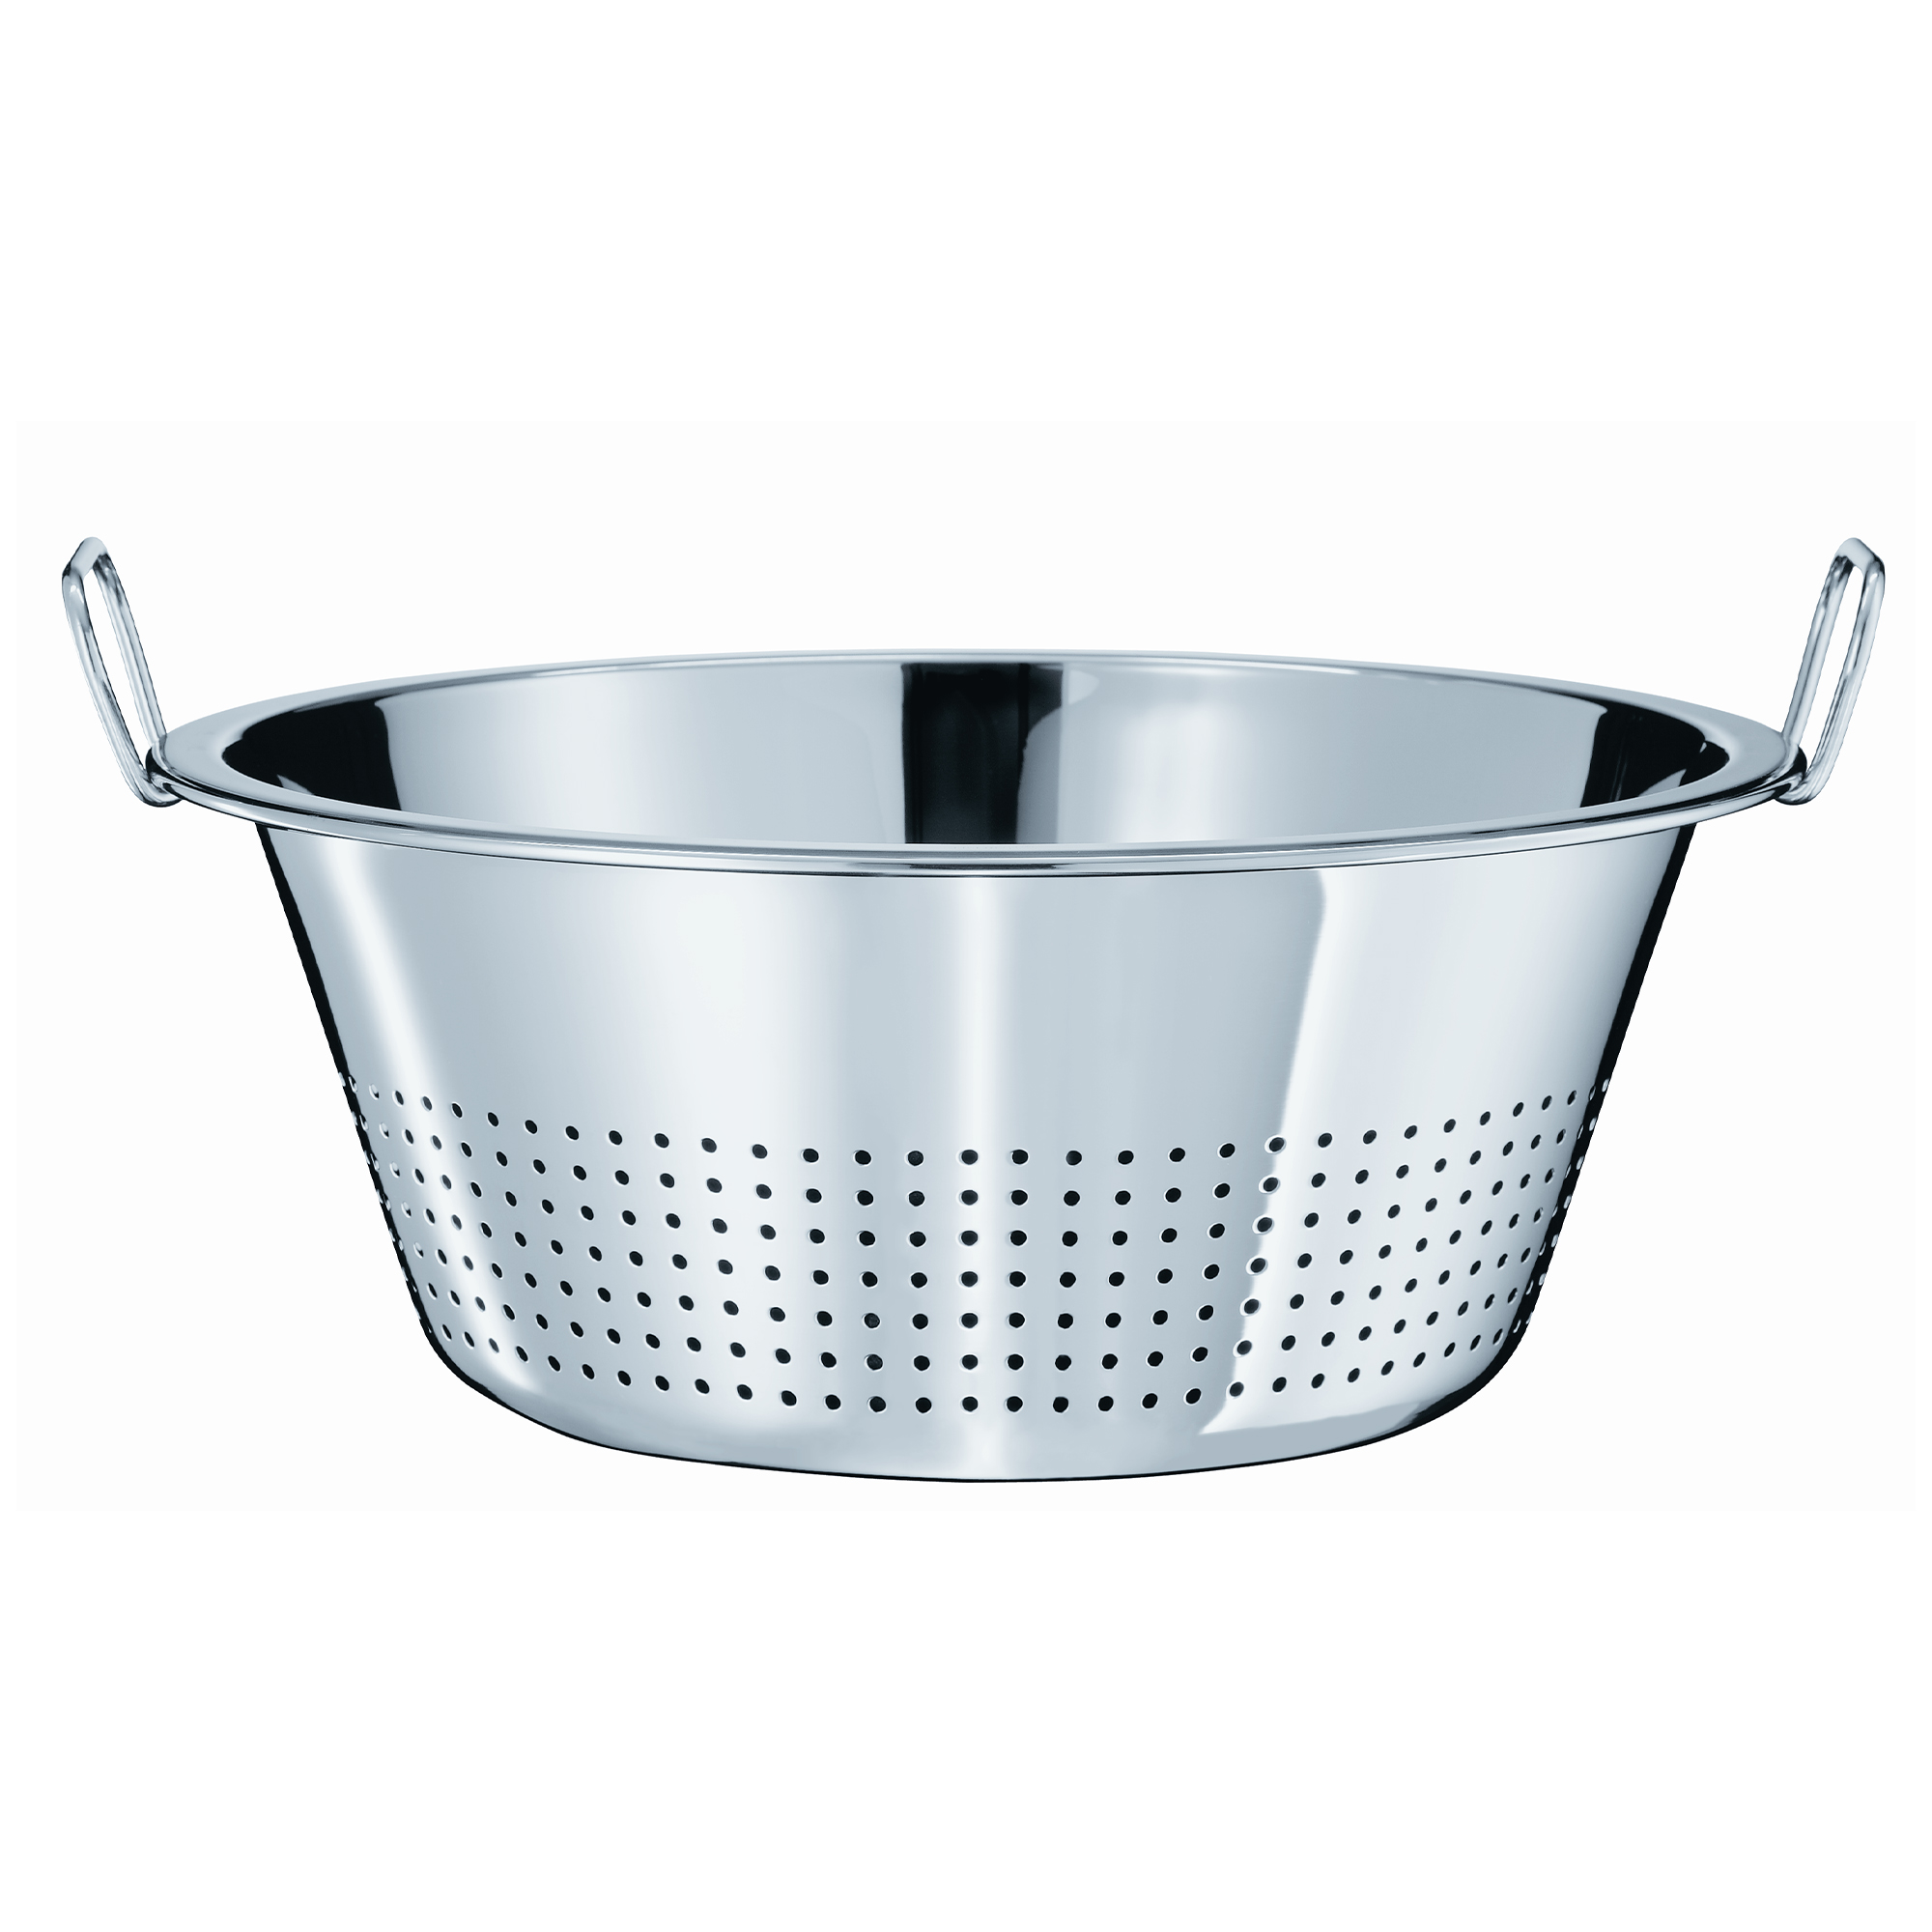 Colander with beaded edge Ø 40 cm|15.8 in.